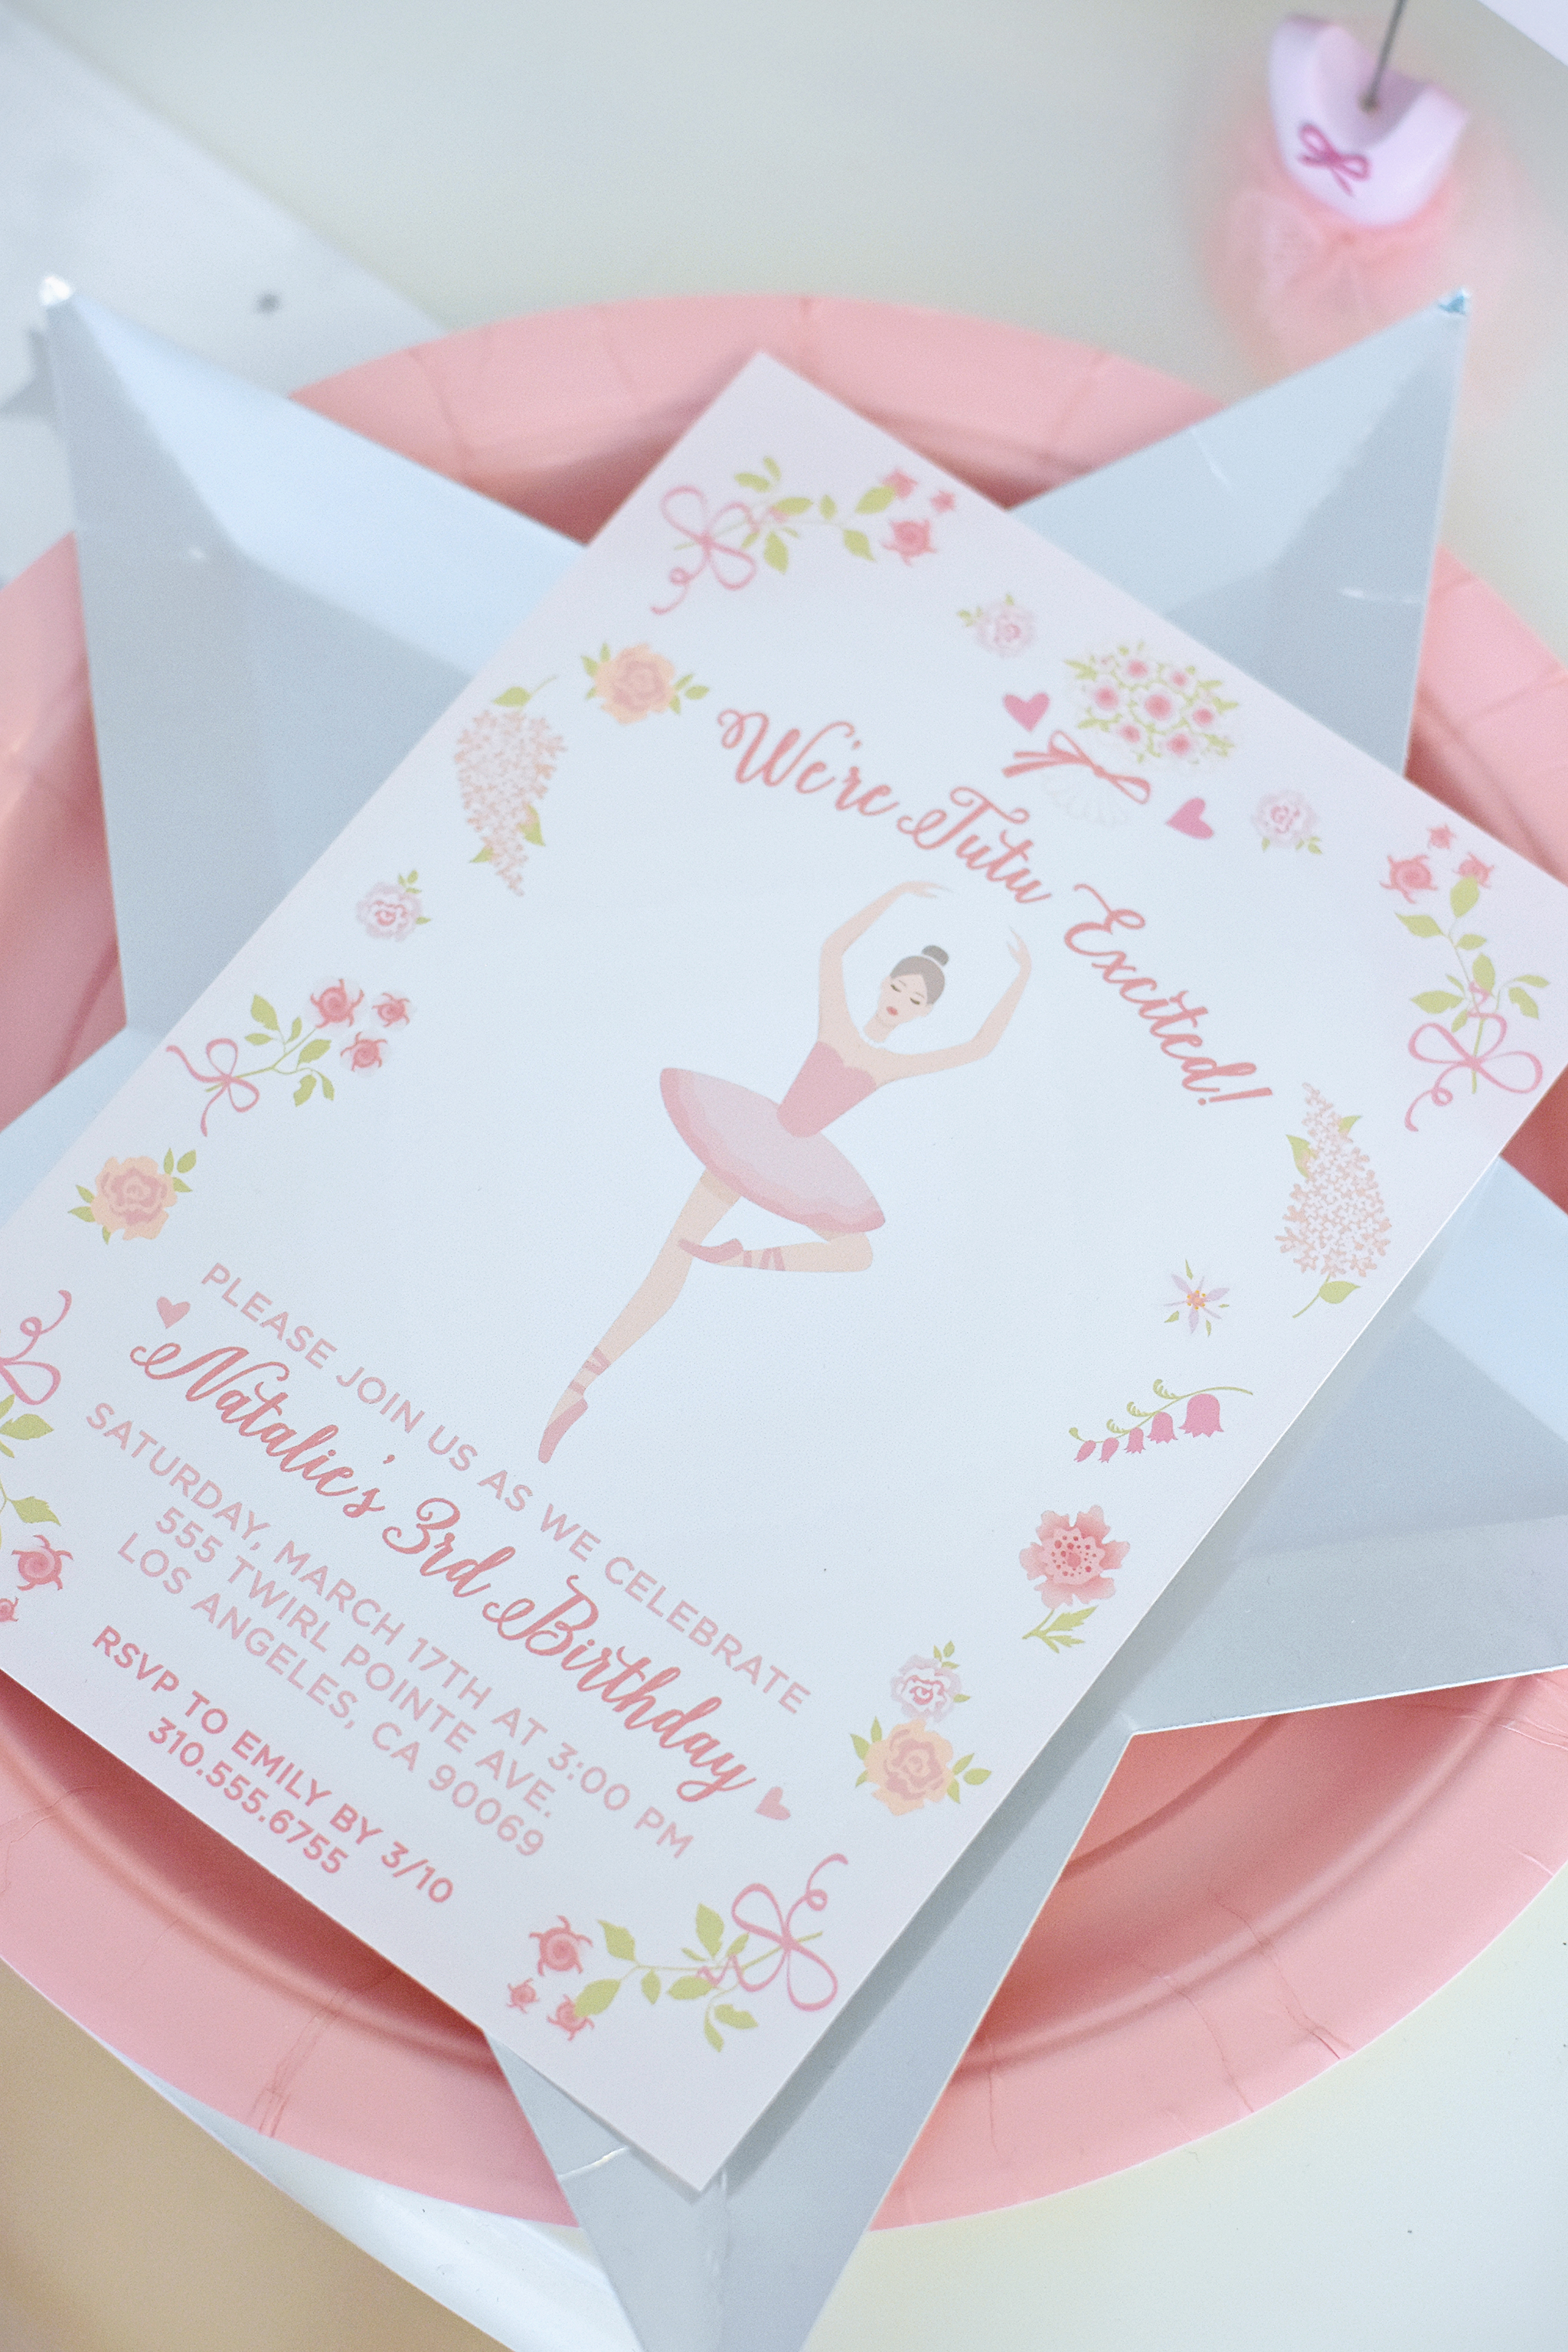 This Ballerina Birthday On Pointe! - Project